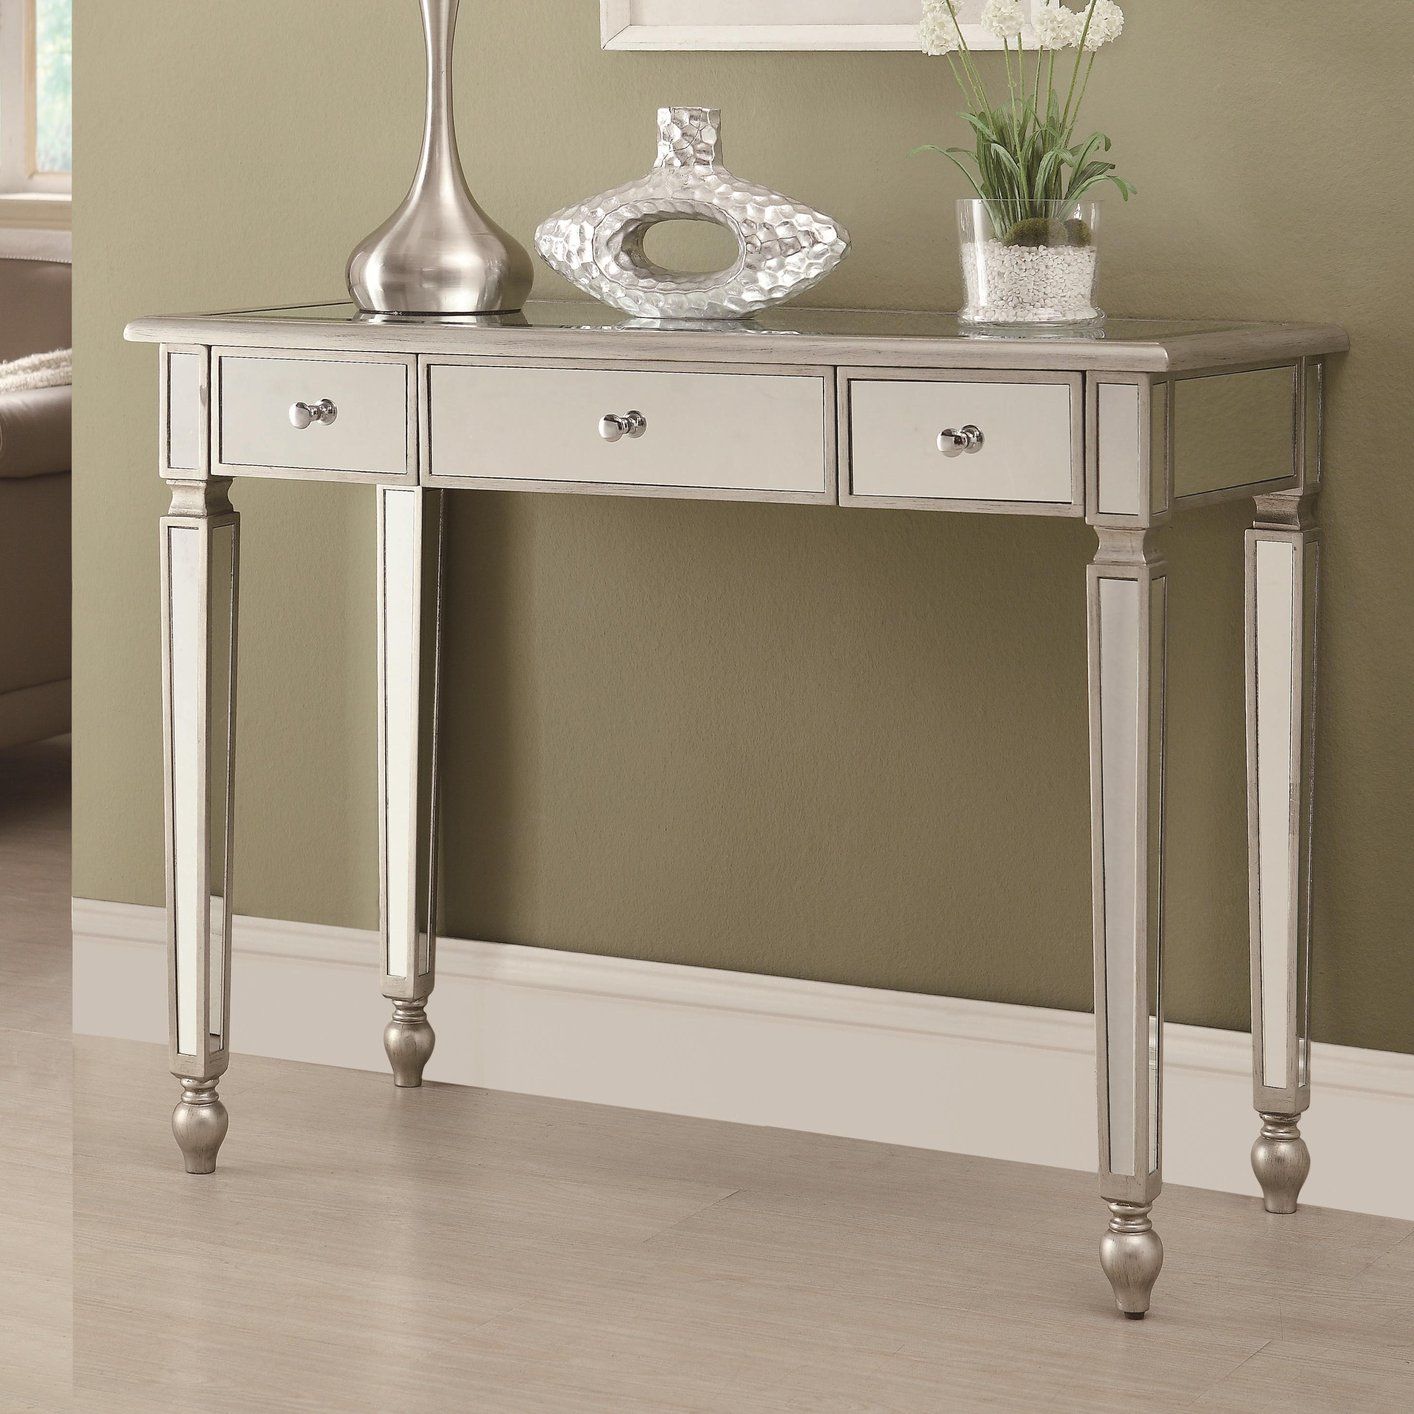 Silver Metal Console Table – Steal A Sofa Furniture Outlet Within Antique Silver Aluminum Coffee Tables (View 14 of 15)